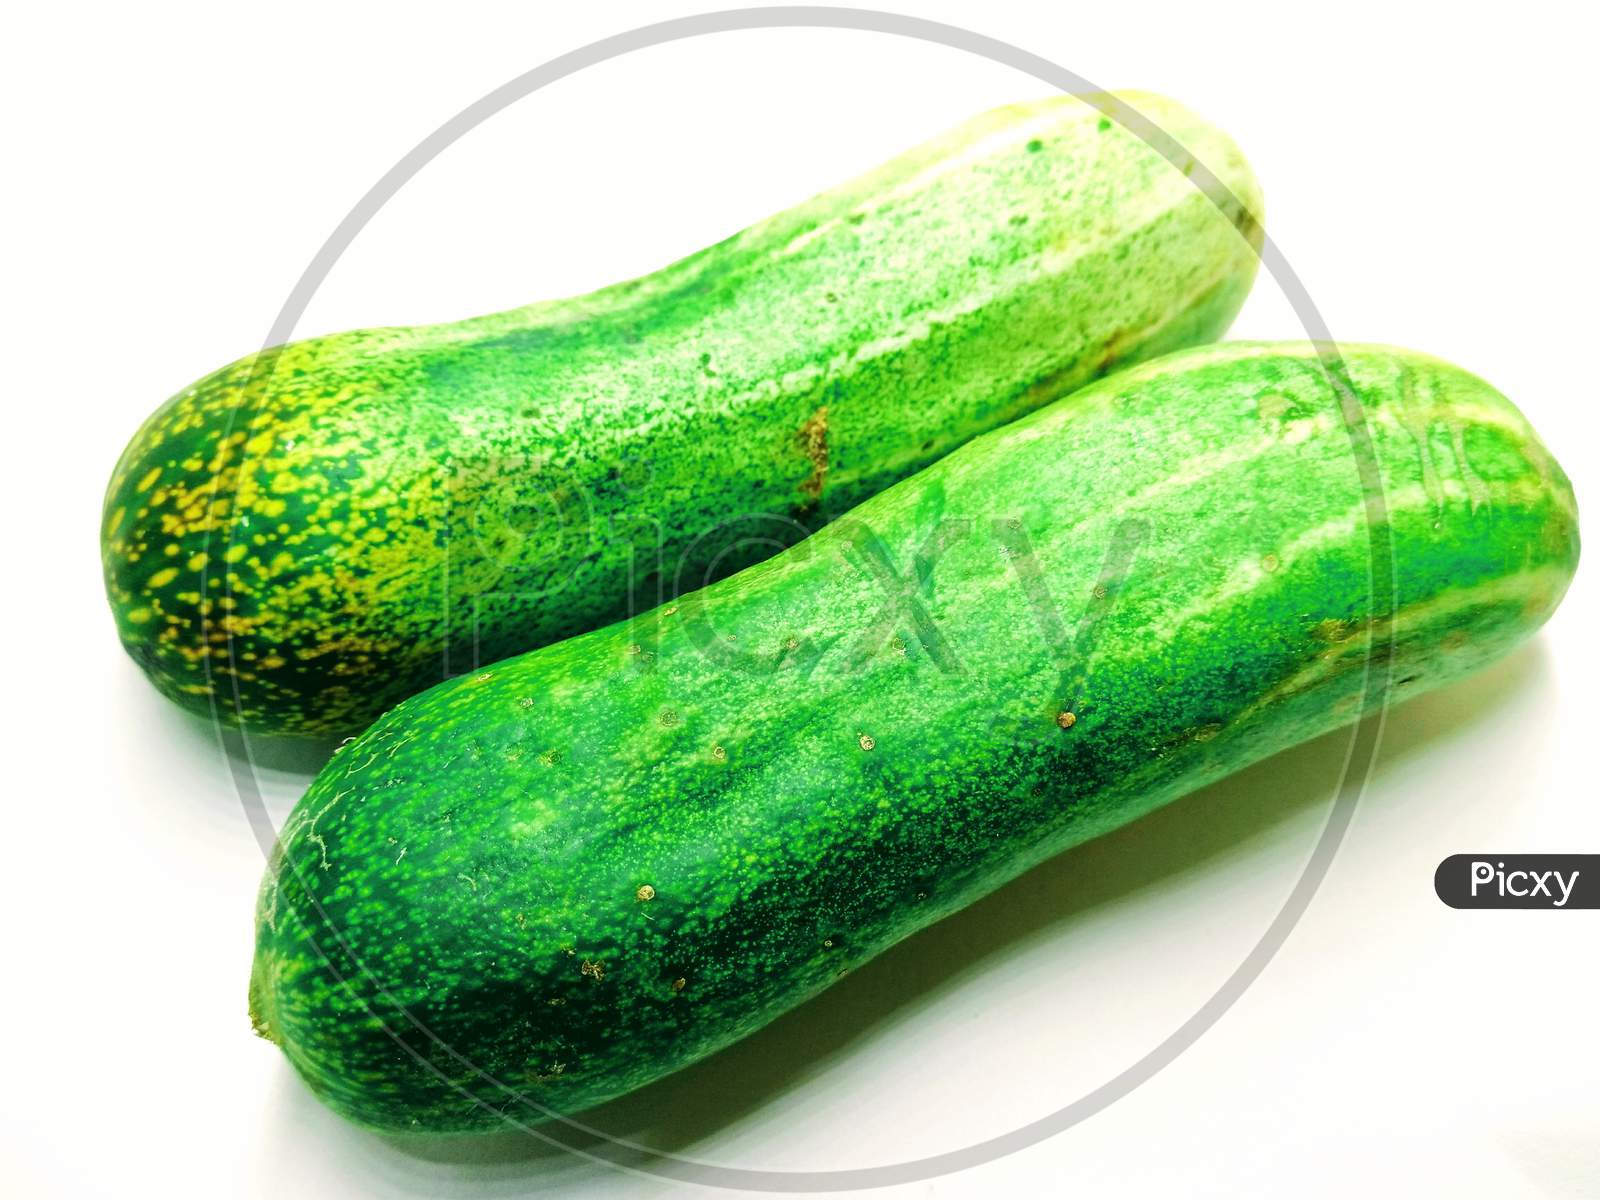 Green Cucumber On Isolated White